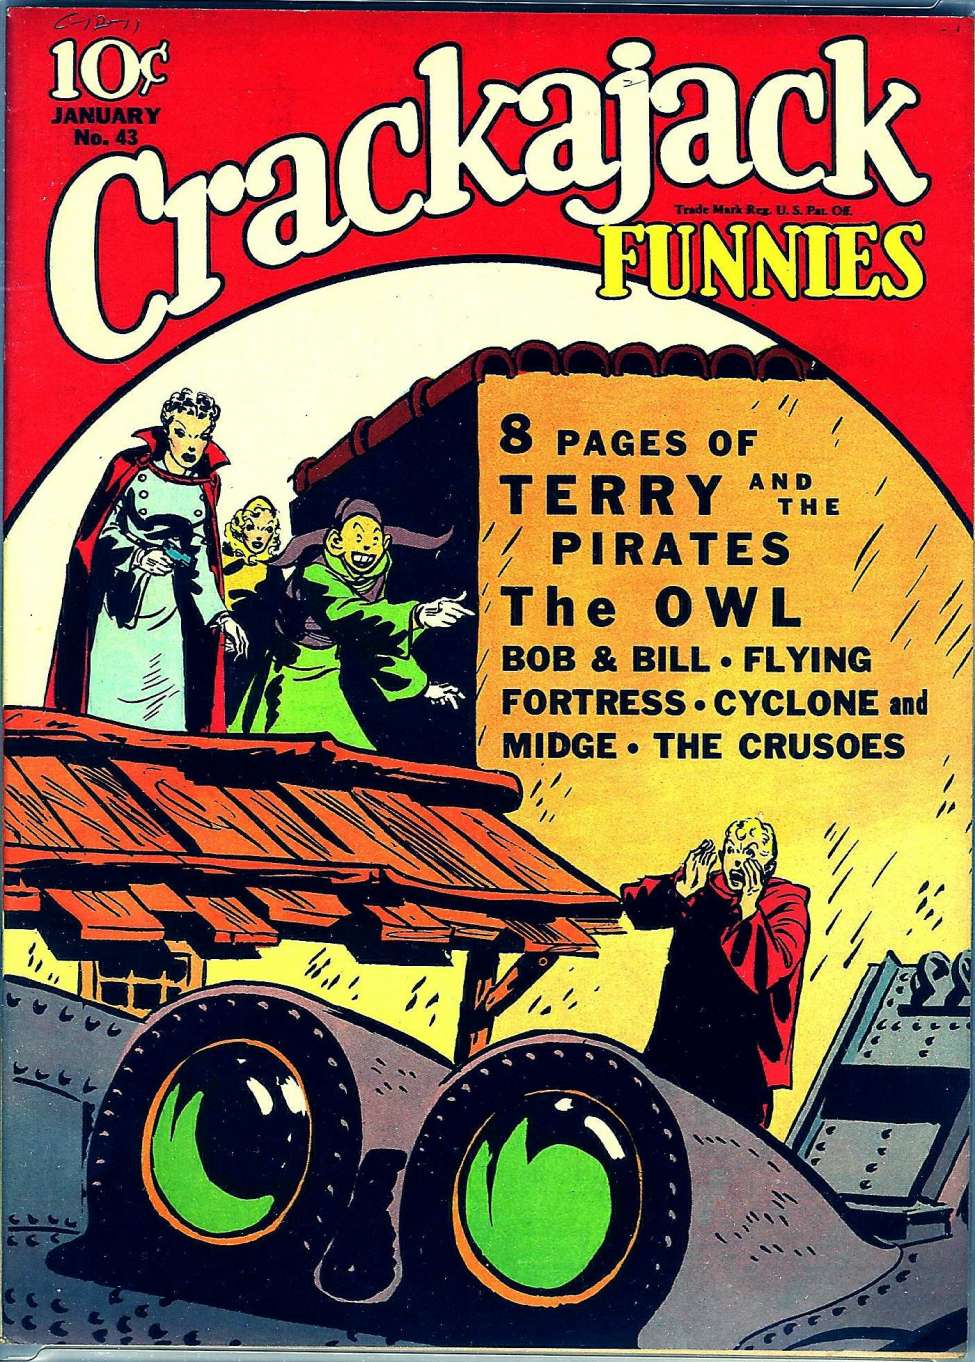 Book Cover For Crackajack Funnies 43